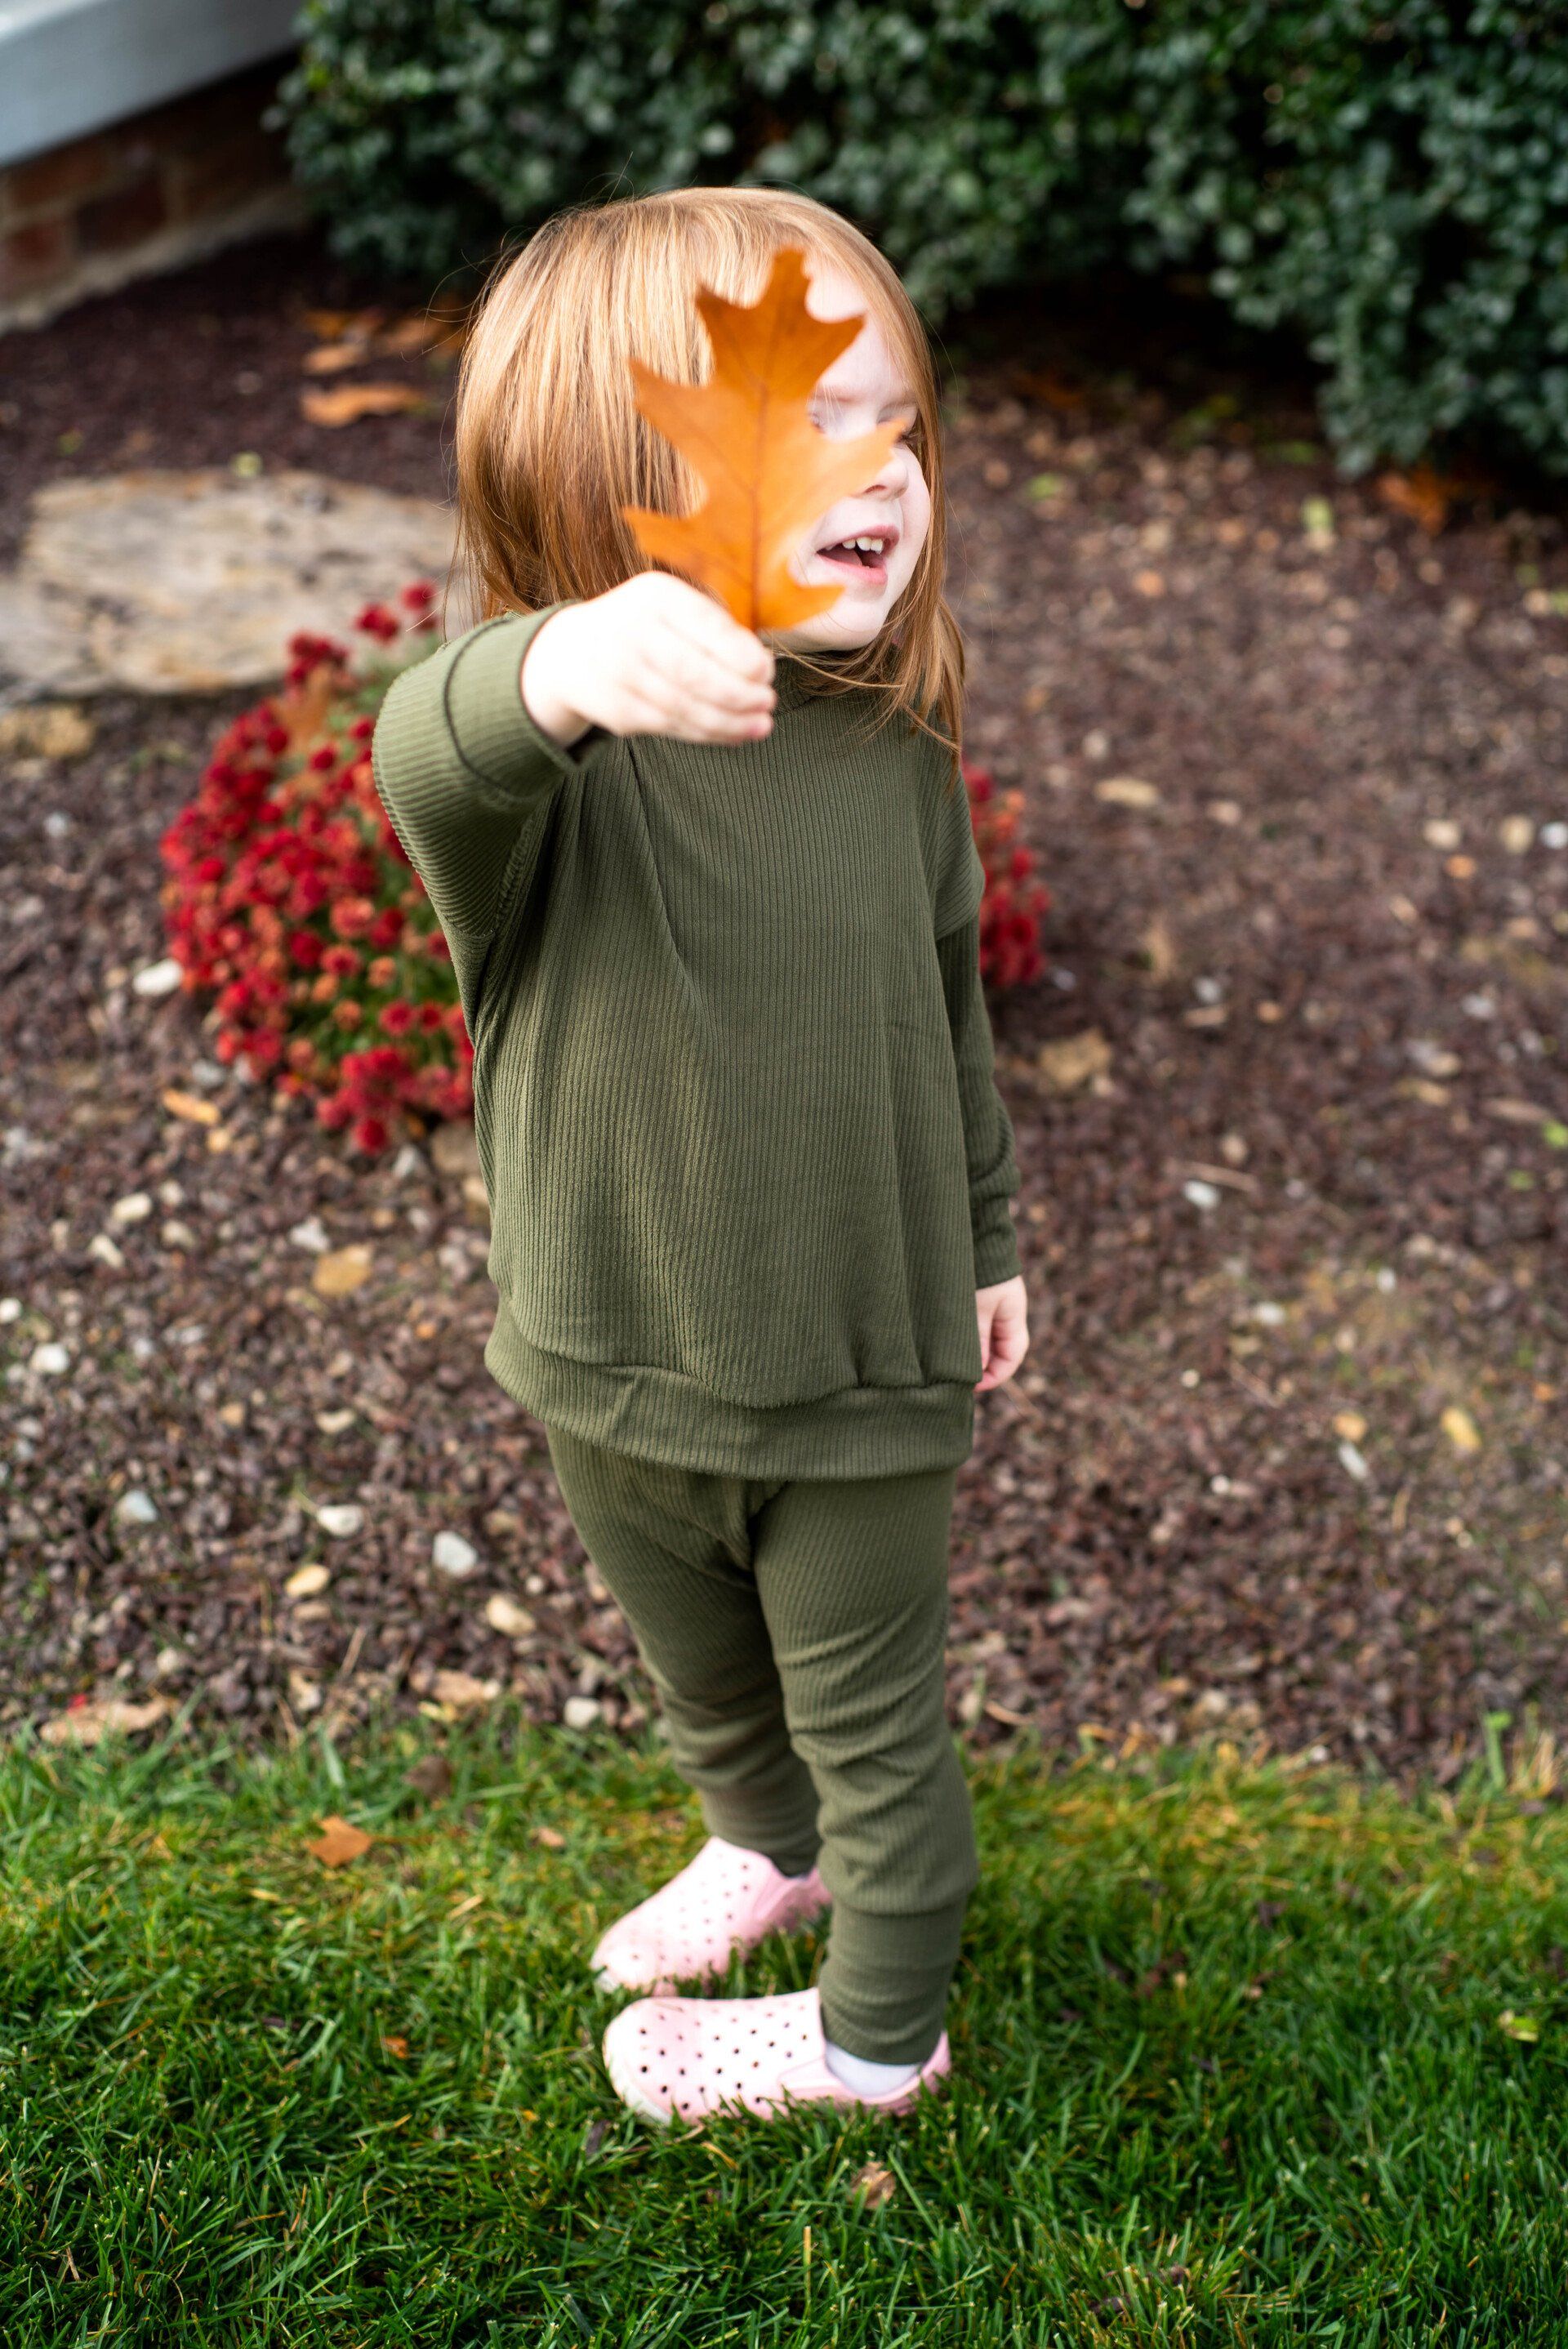 Little girl in a olive green shirt and pants holding up a orange oak leaf in front of her face.